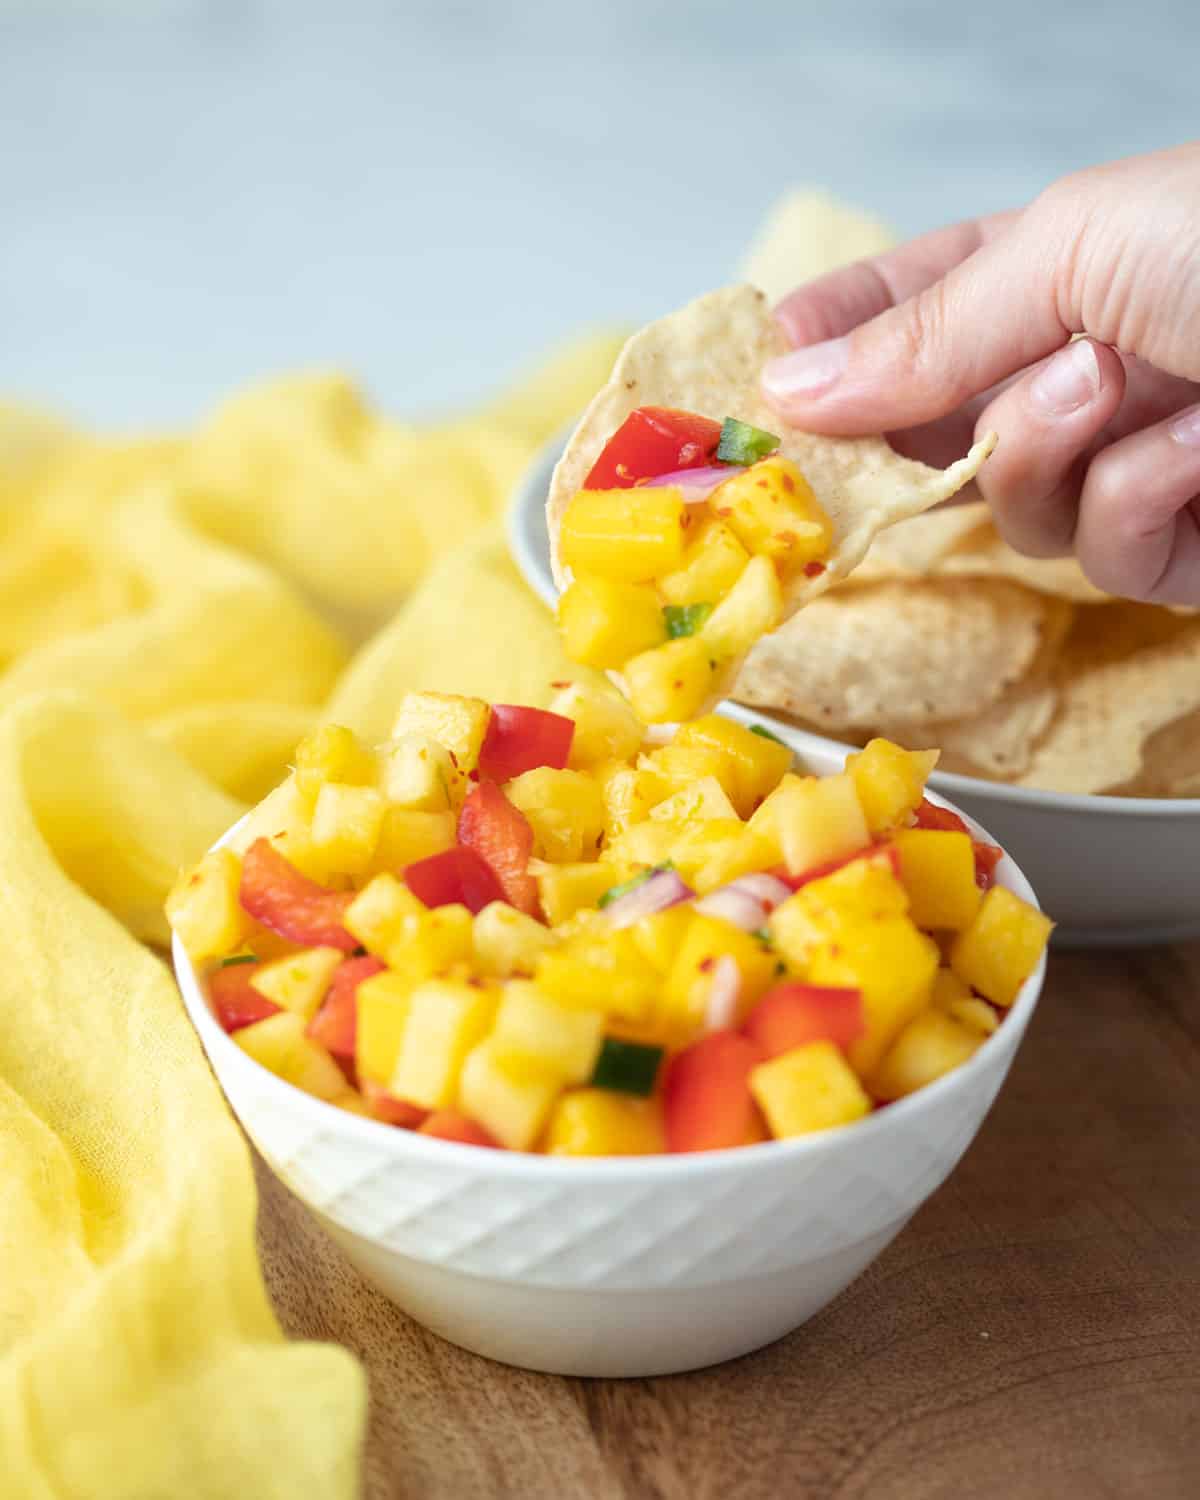 Hand dipping a chip into the pineapple mango salsa.
